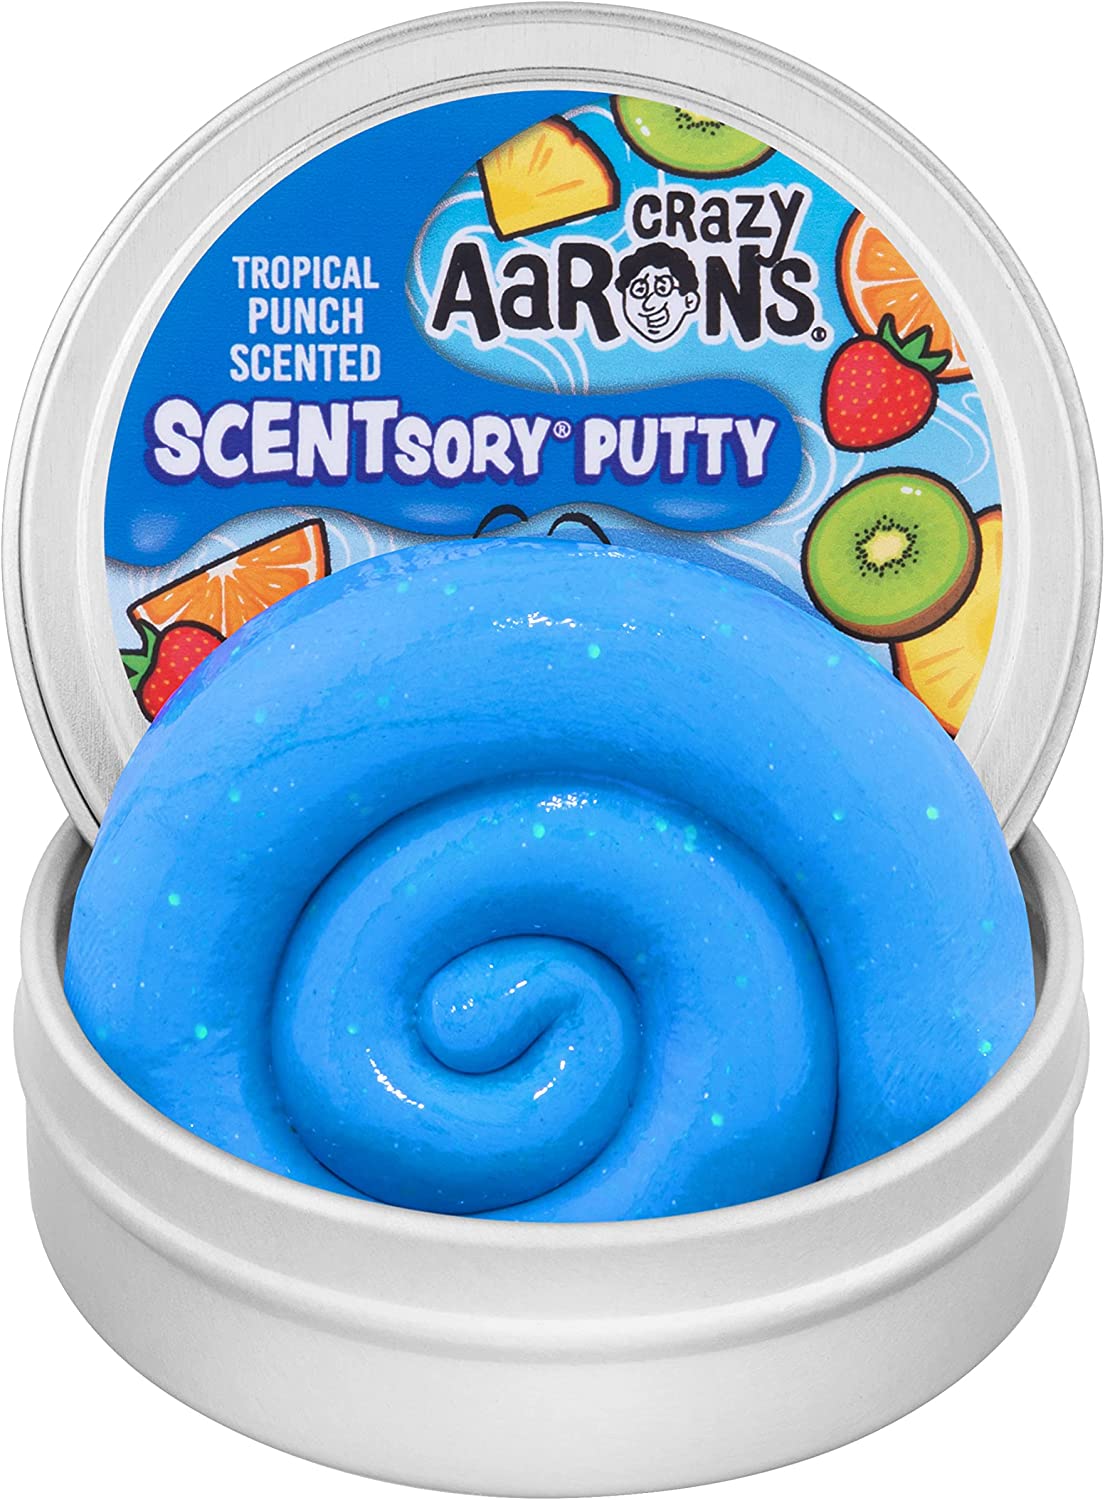 AARON'S PUTTY TROPICAL PUNCH - SCENTSORY PUTTY